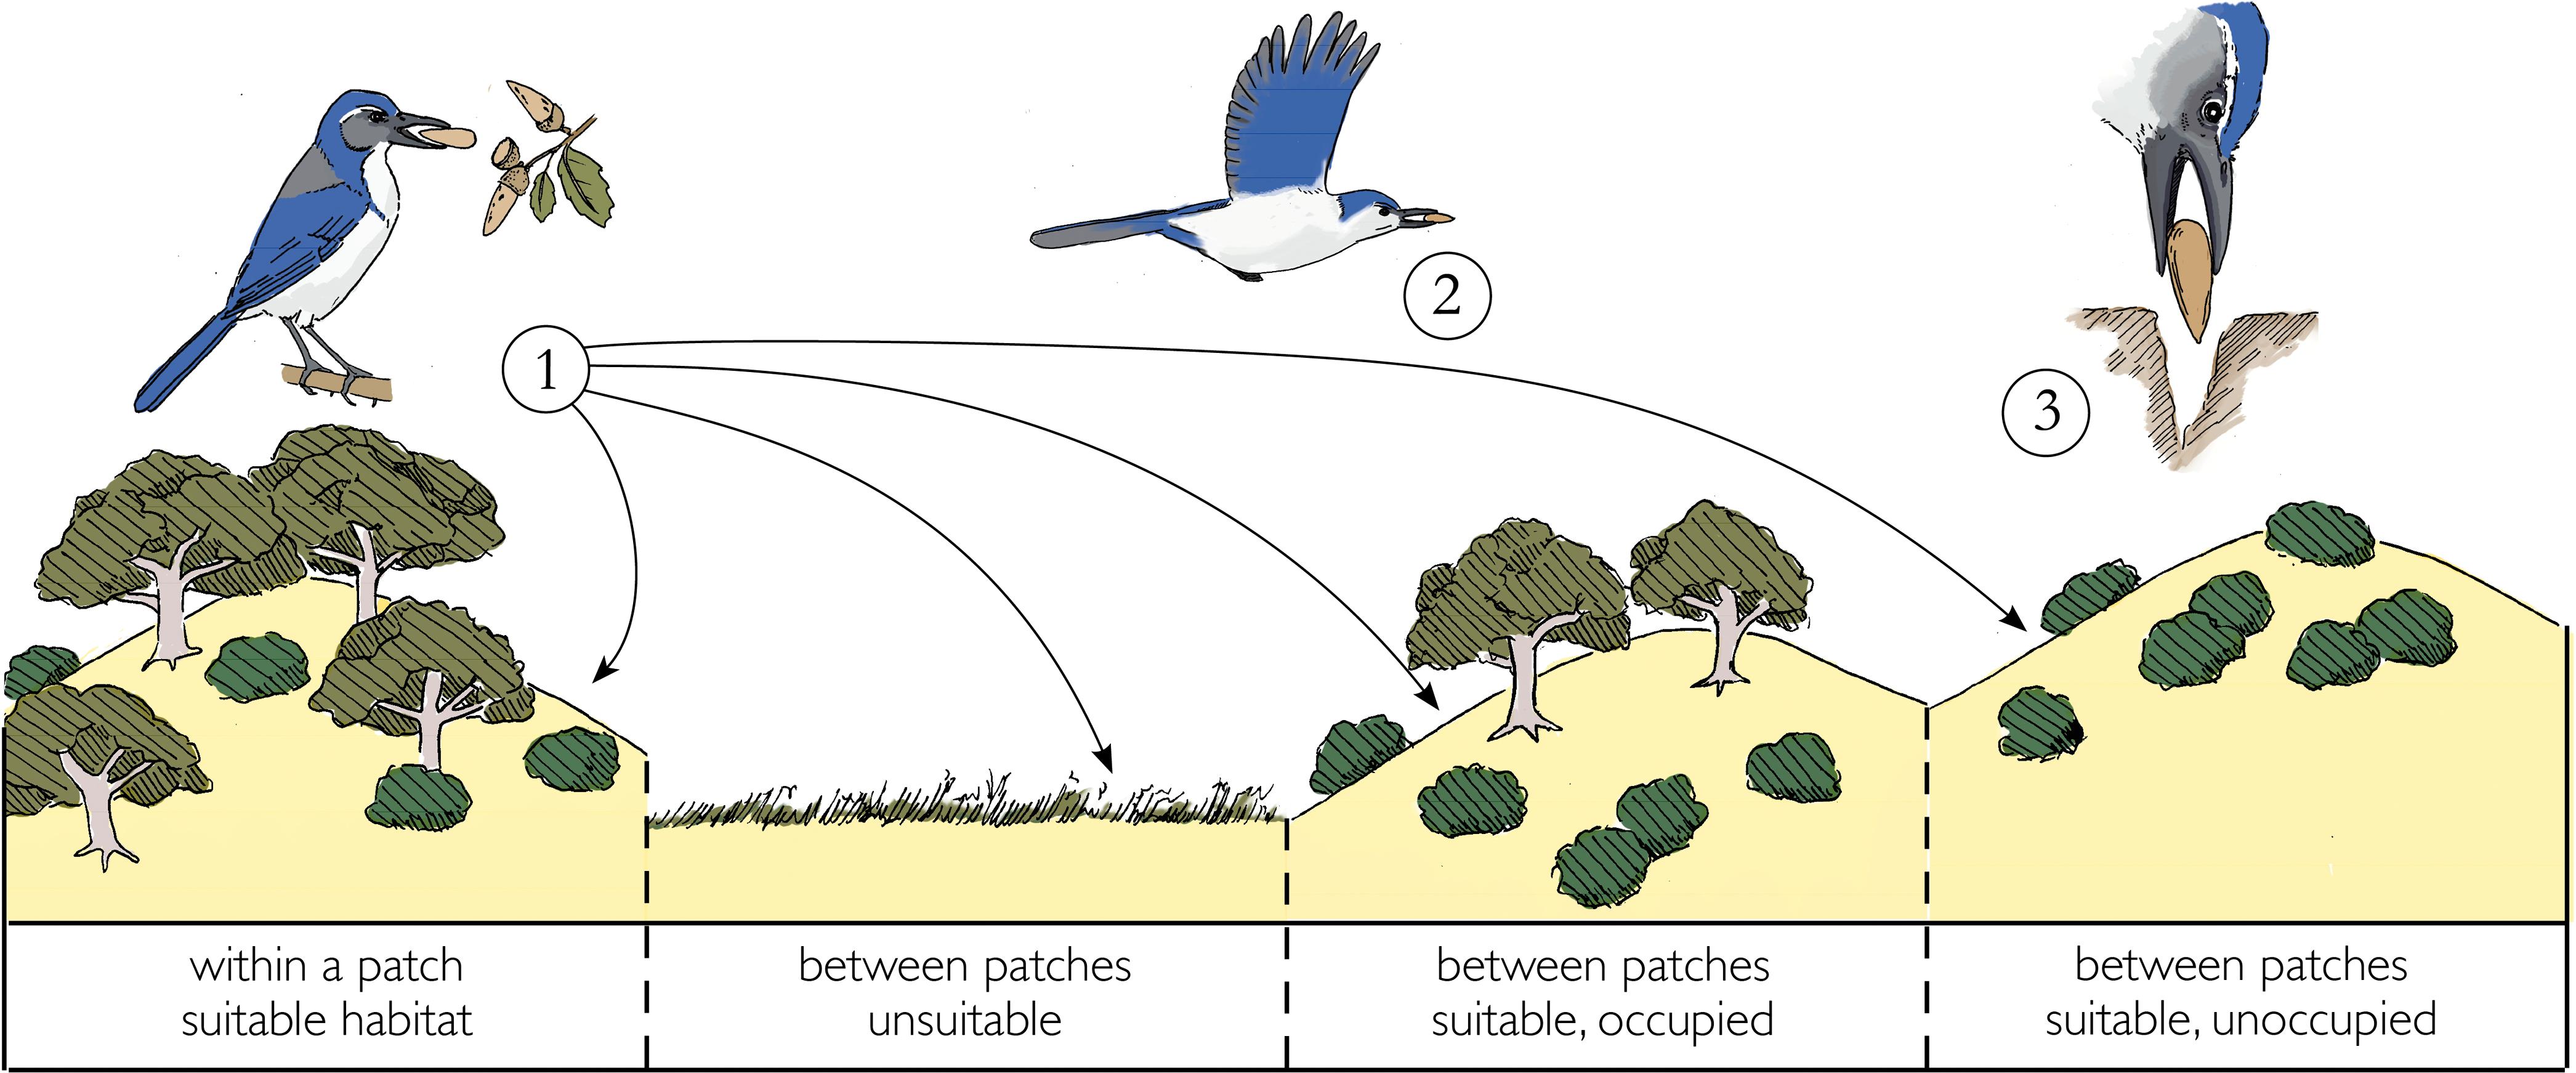 Scatter-hoarding corvids as seed dispersers for oaks and pines: A review of  a widely distributed mutualism and its utility to habitat restoration